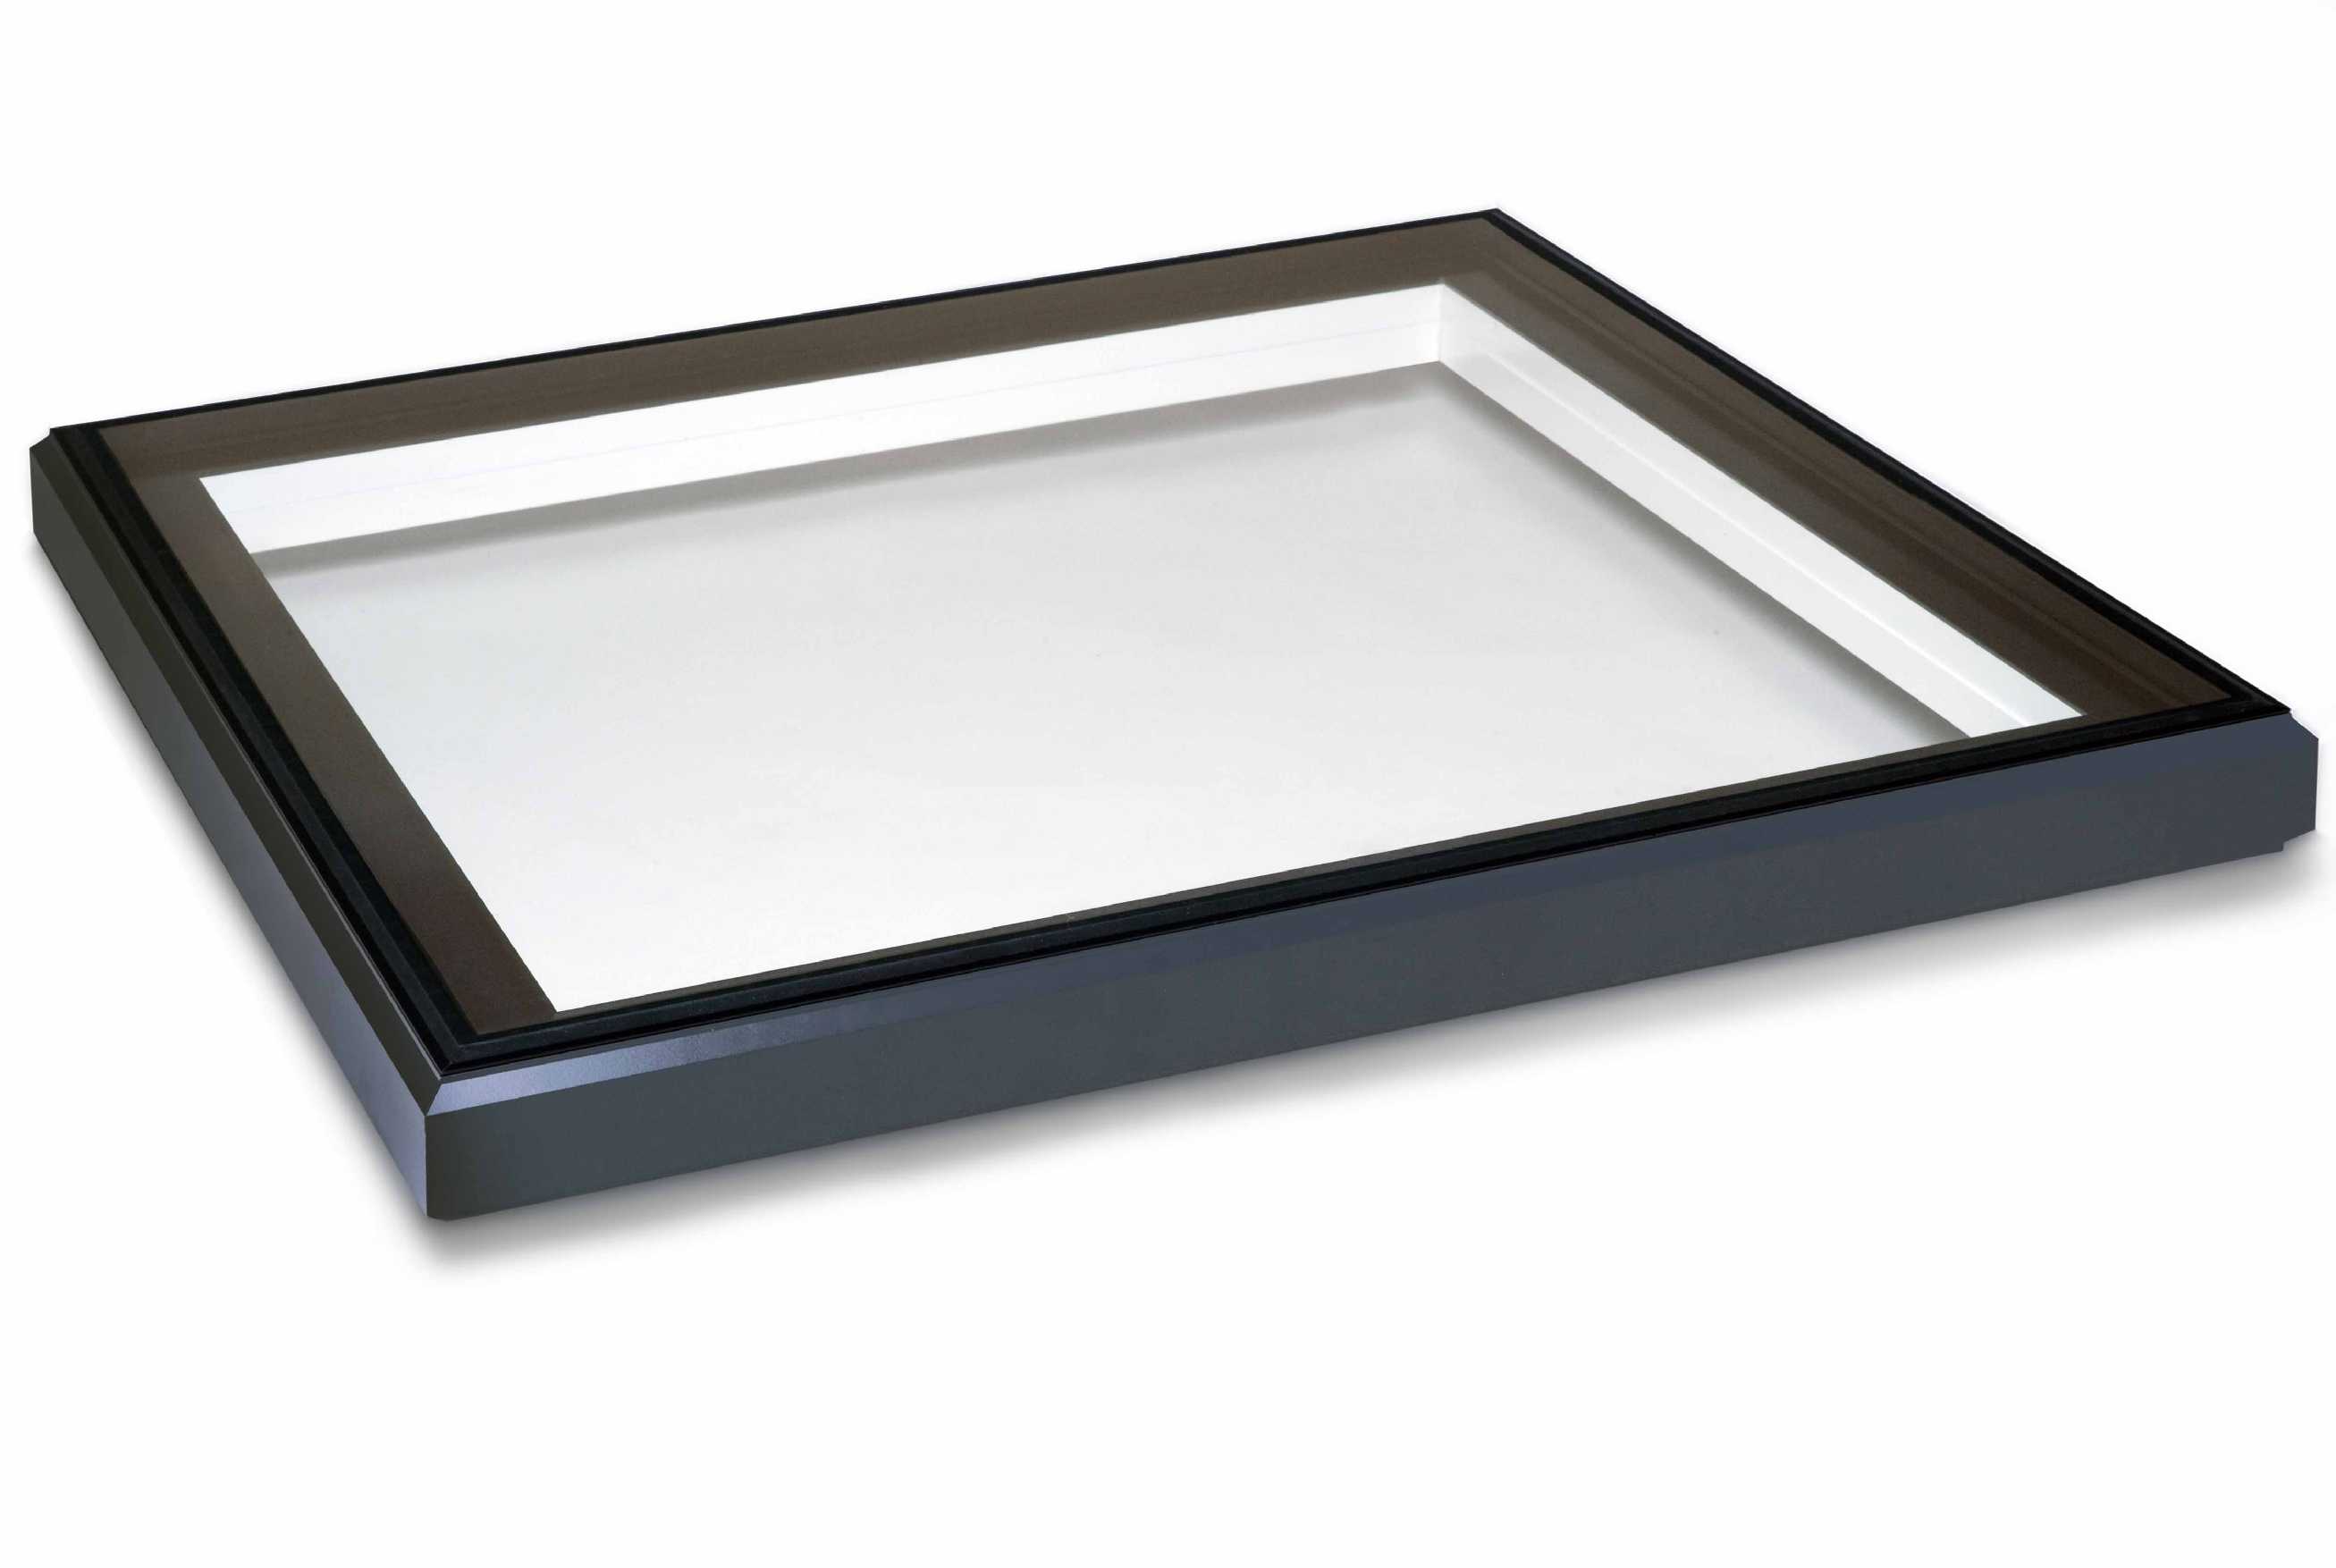 Buy EcoGard Flat Roof light, Double Glazed, Fixed, 1,000mm x 1,500mm online today